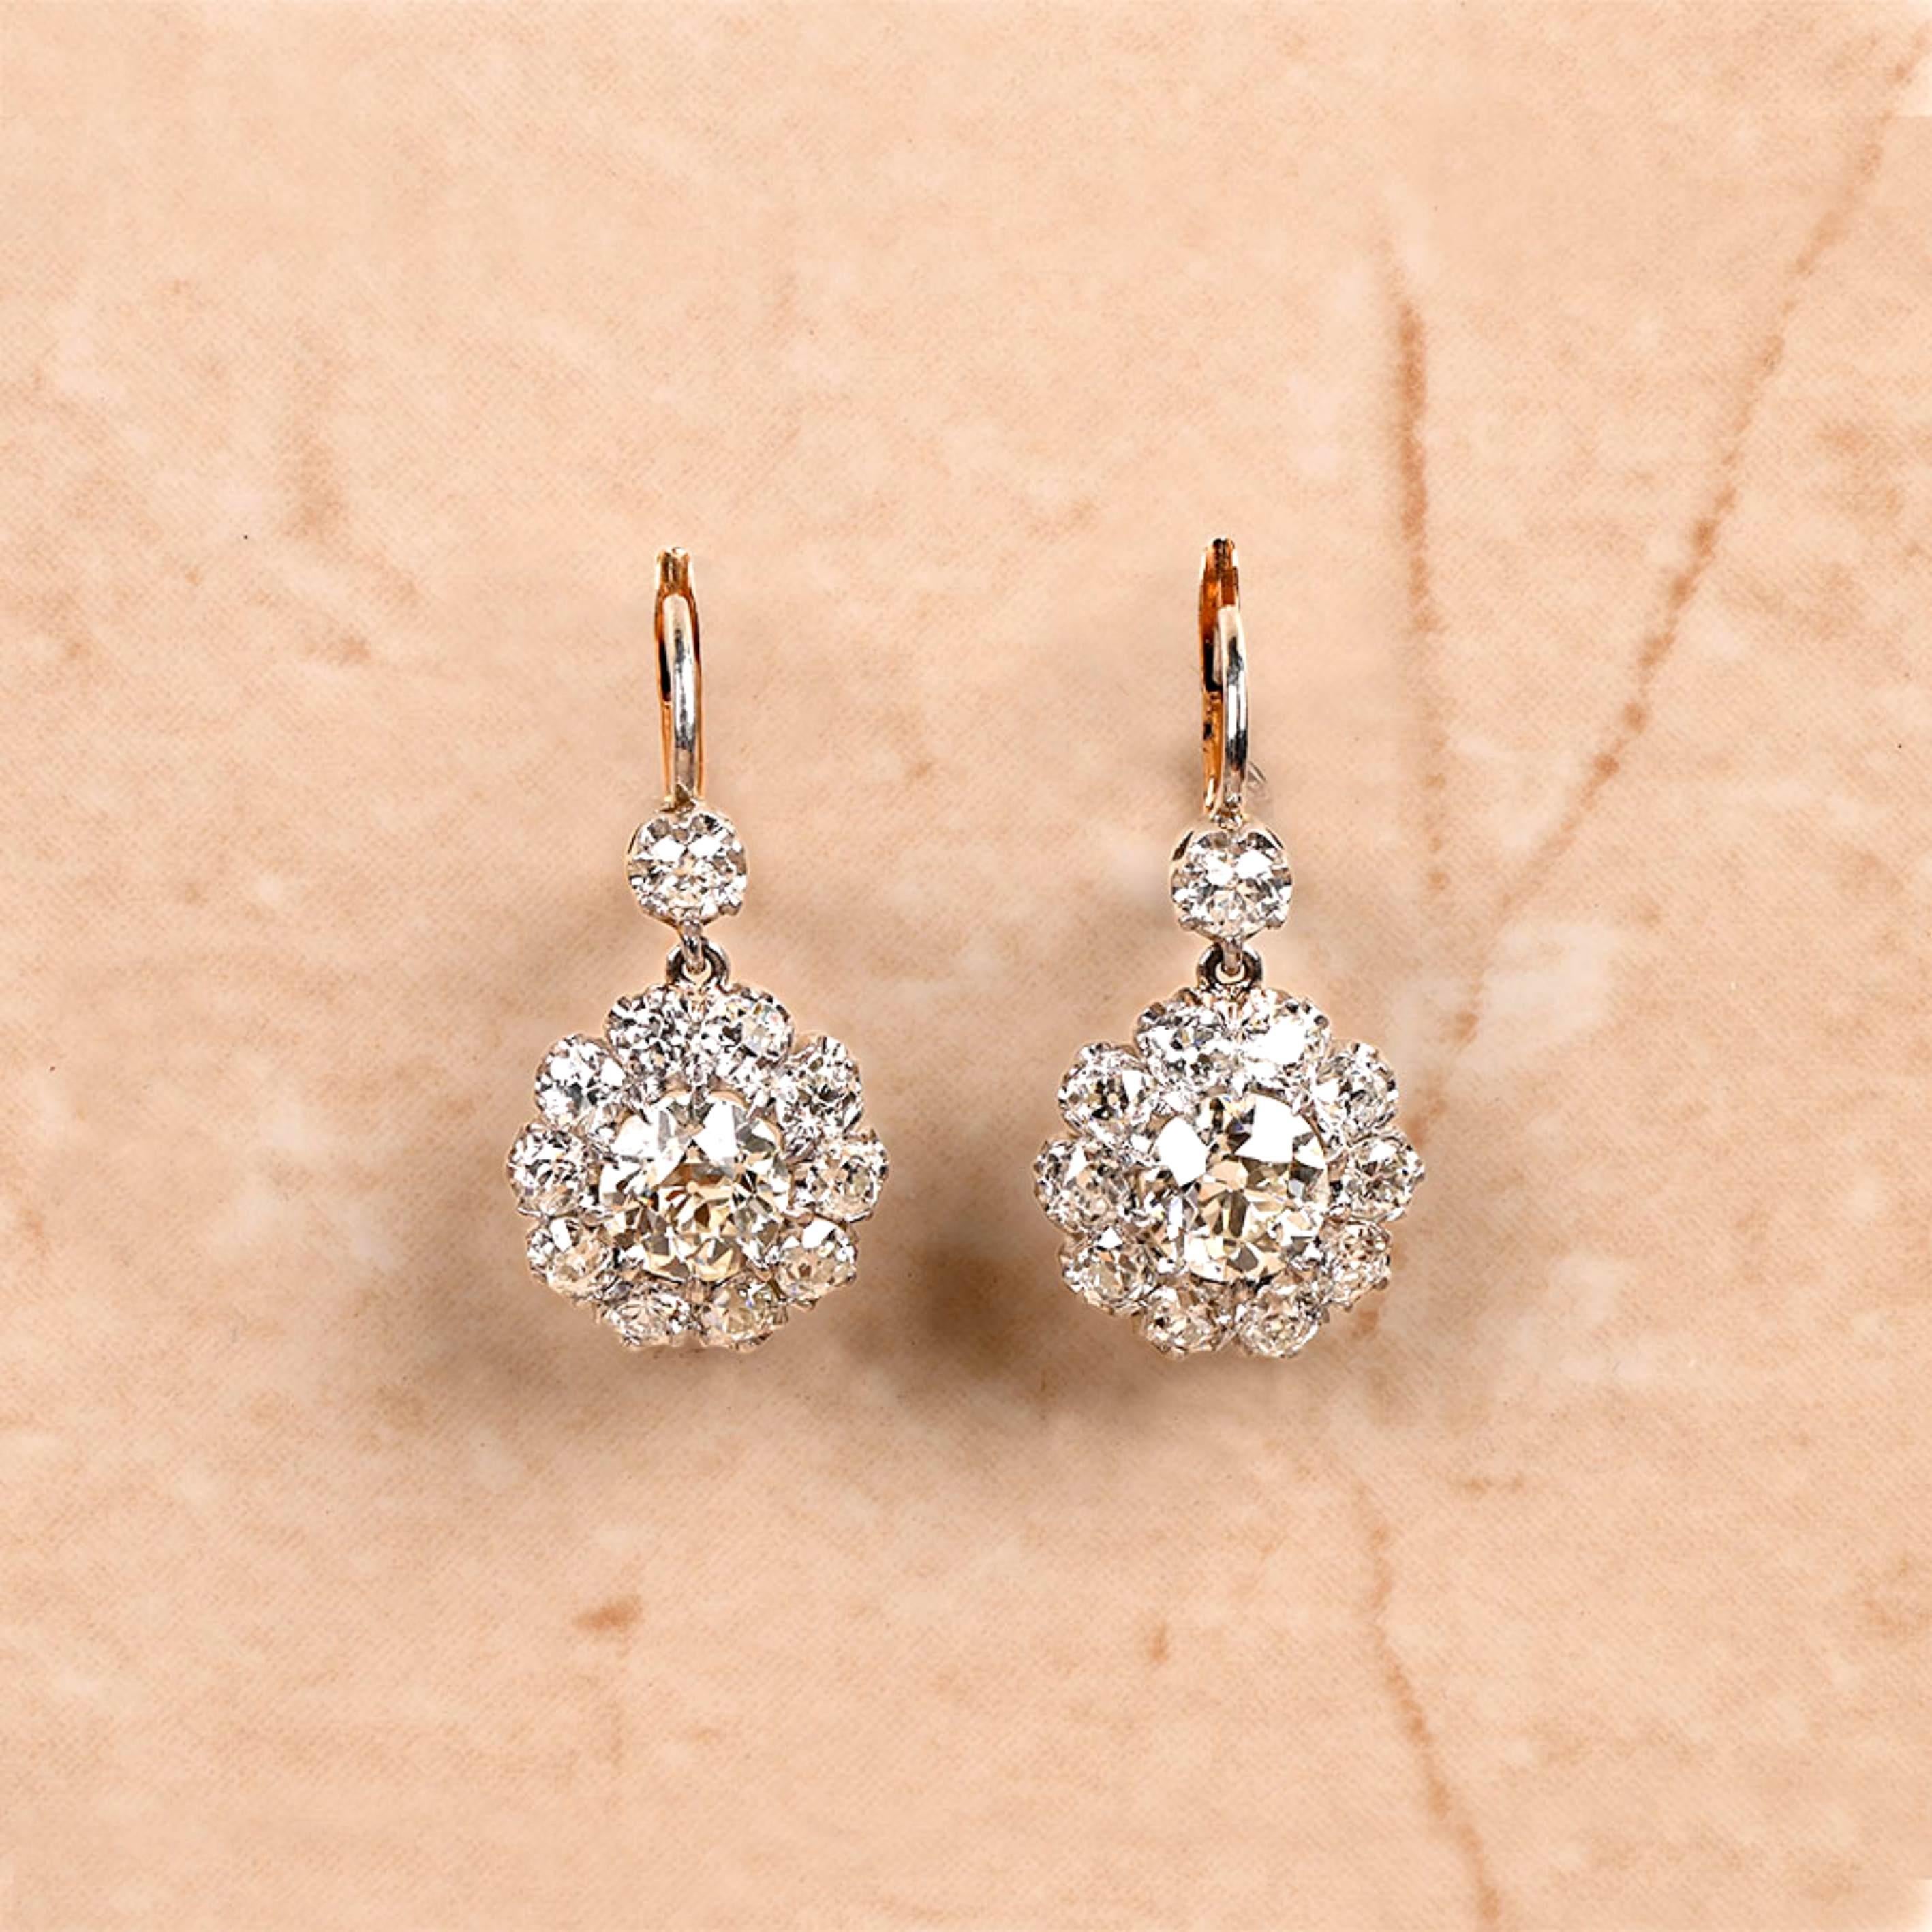 2.90ct Old European Cut Diamond Cluster Earrings, 18K Yellow Gold & Platinum In Excellent Condition For Sale In New York, NY